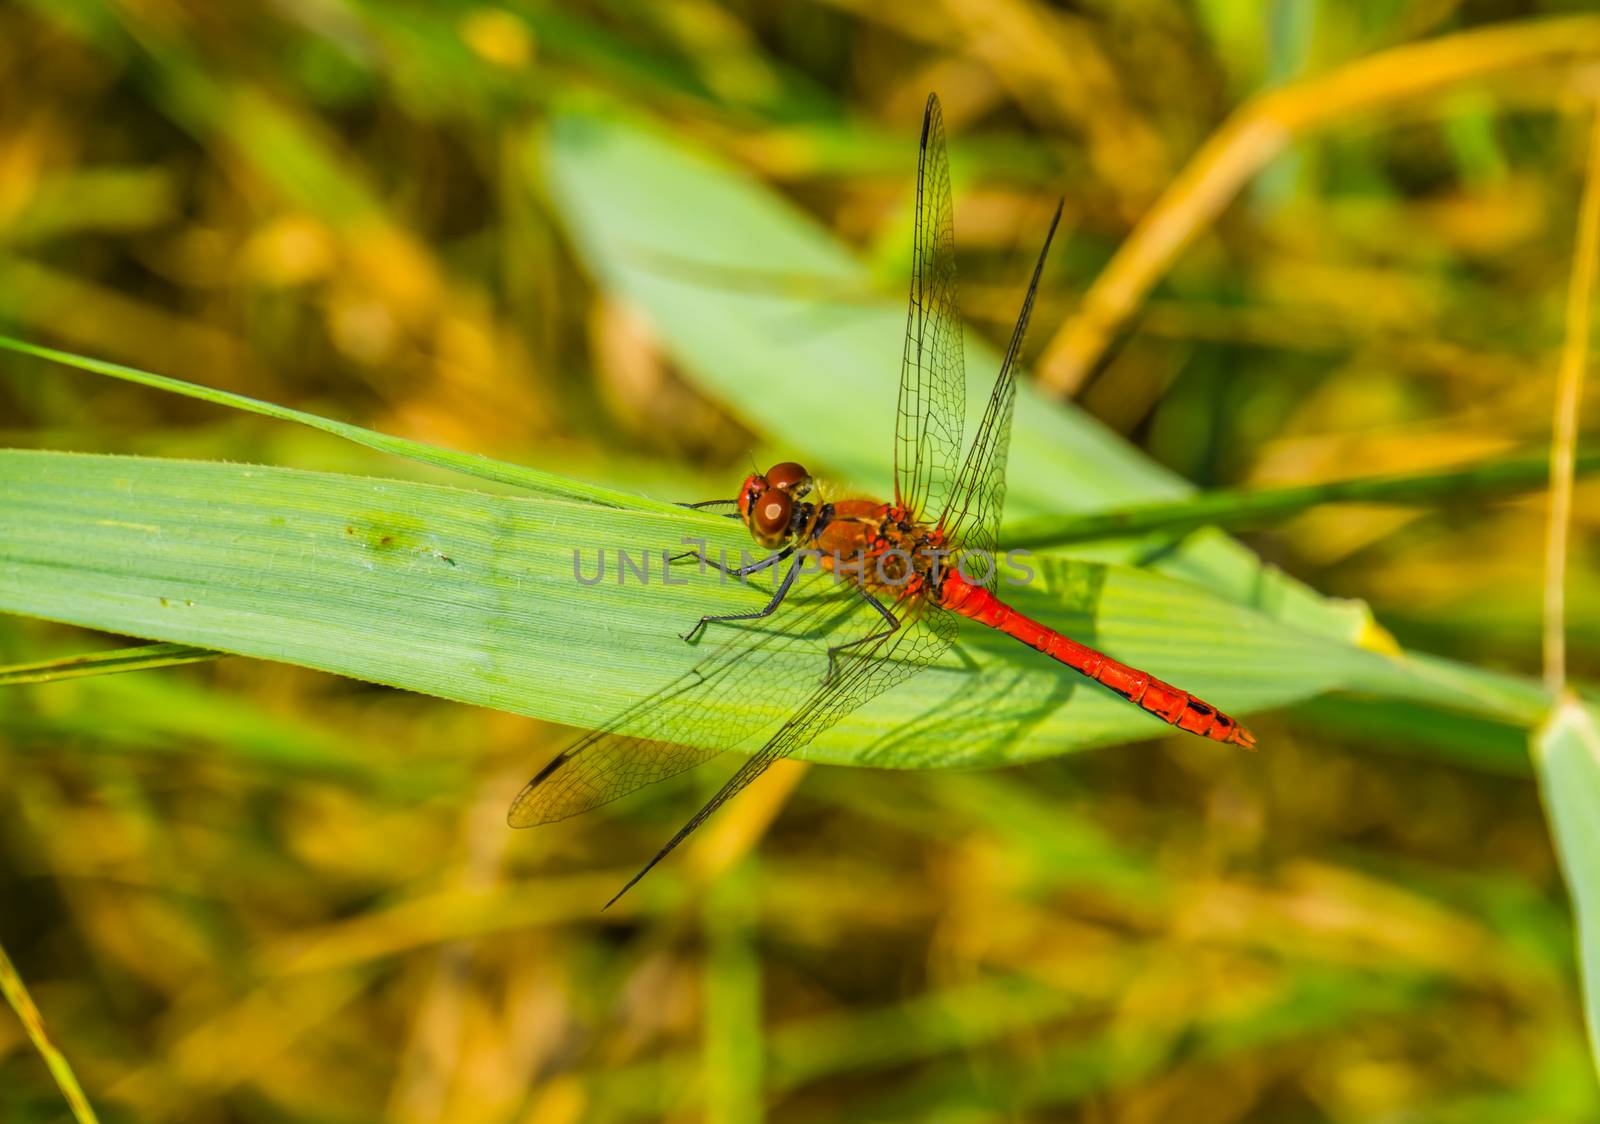 macro closeup of a ruddy darter, fire red dragonfly, common insect specie from Europe